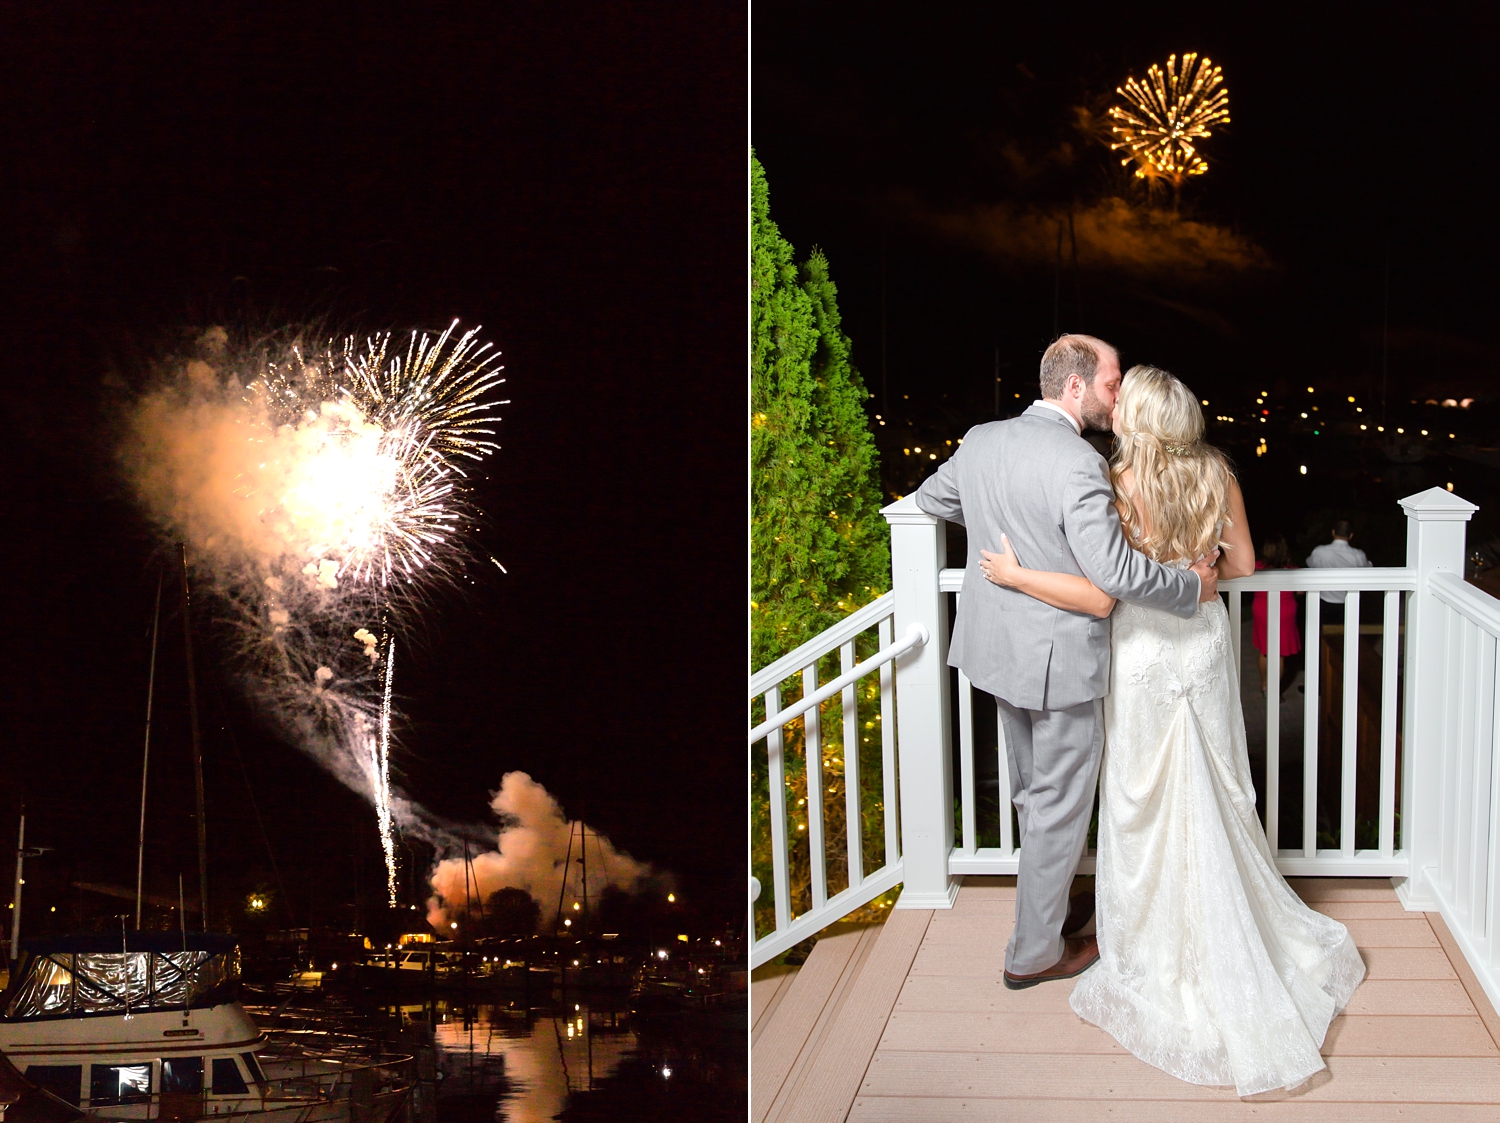  The wedding on the other side of the venue had fireworks so Rob &amp; Alyson got to enjoy them along with all of their guests! 